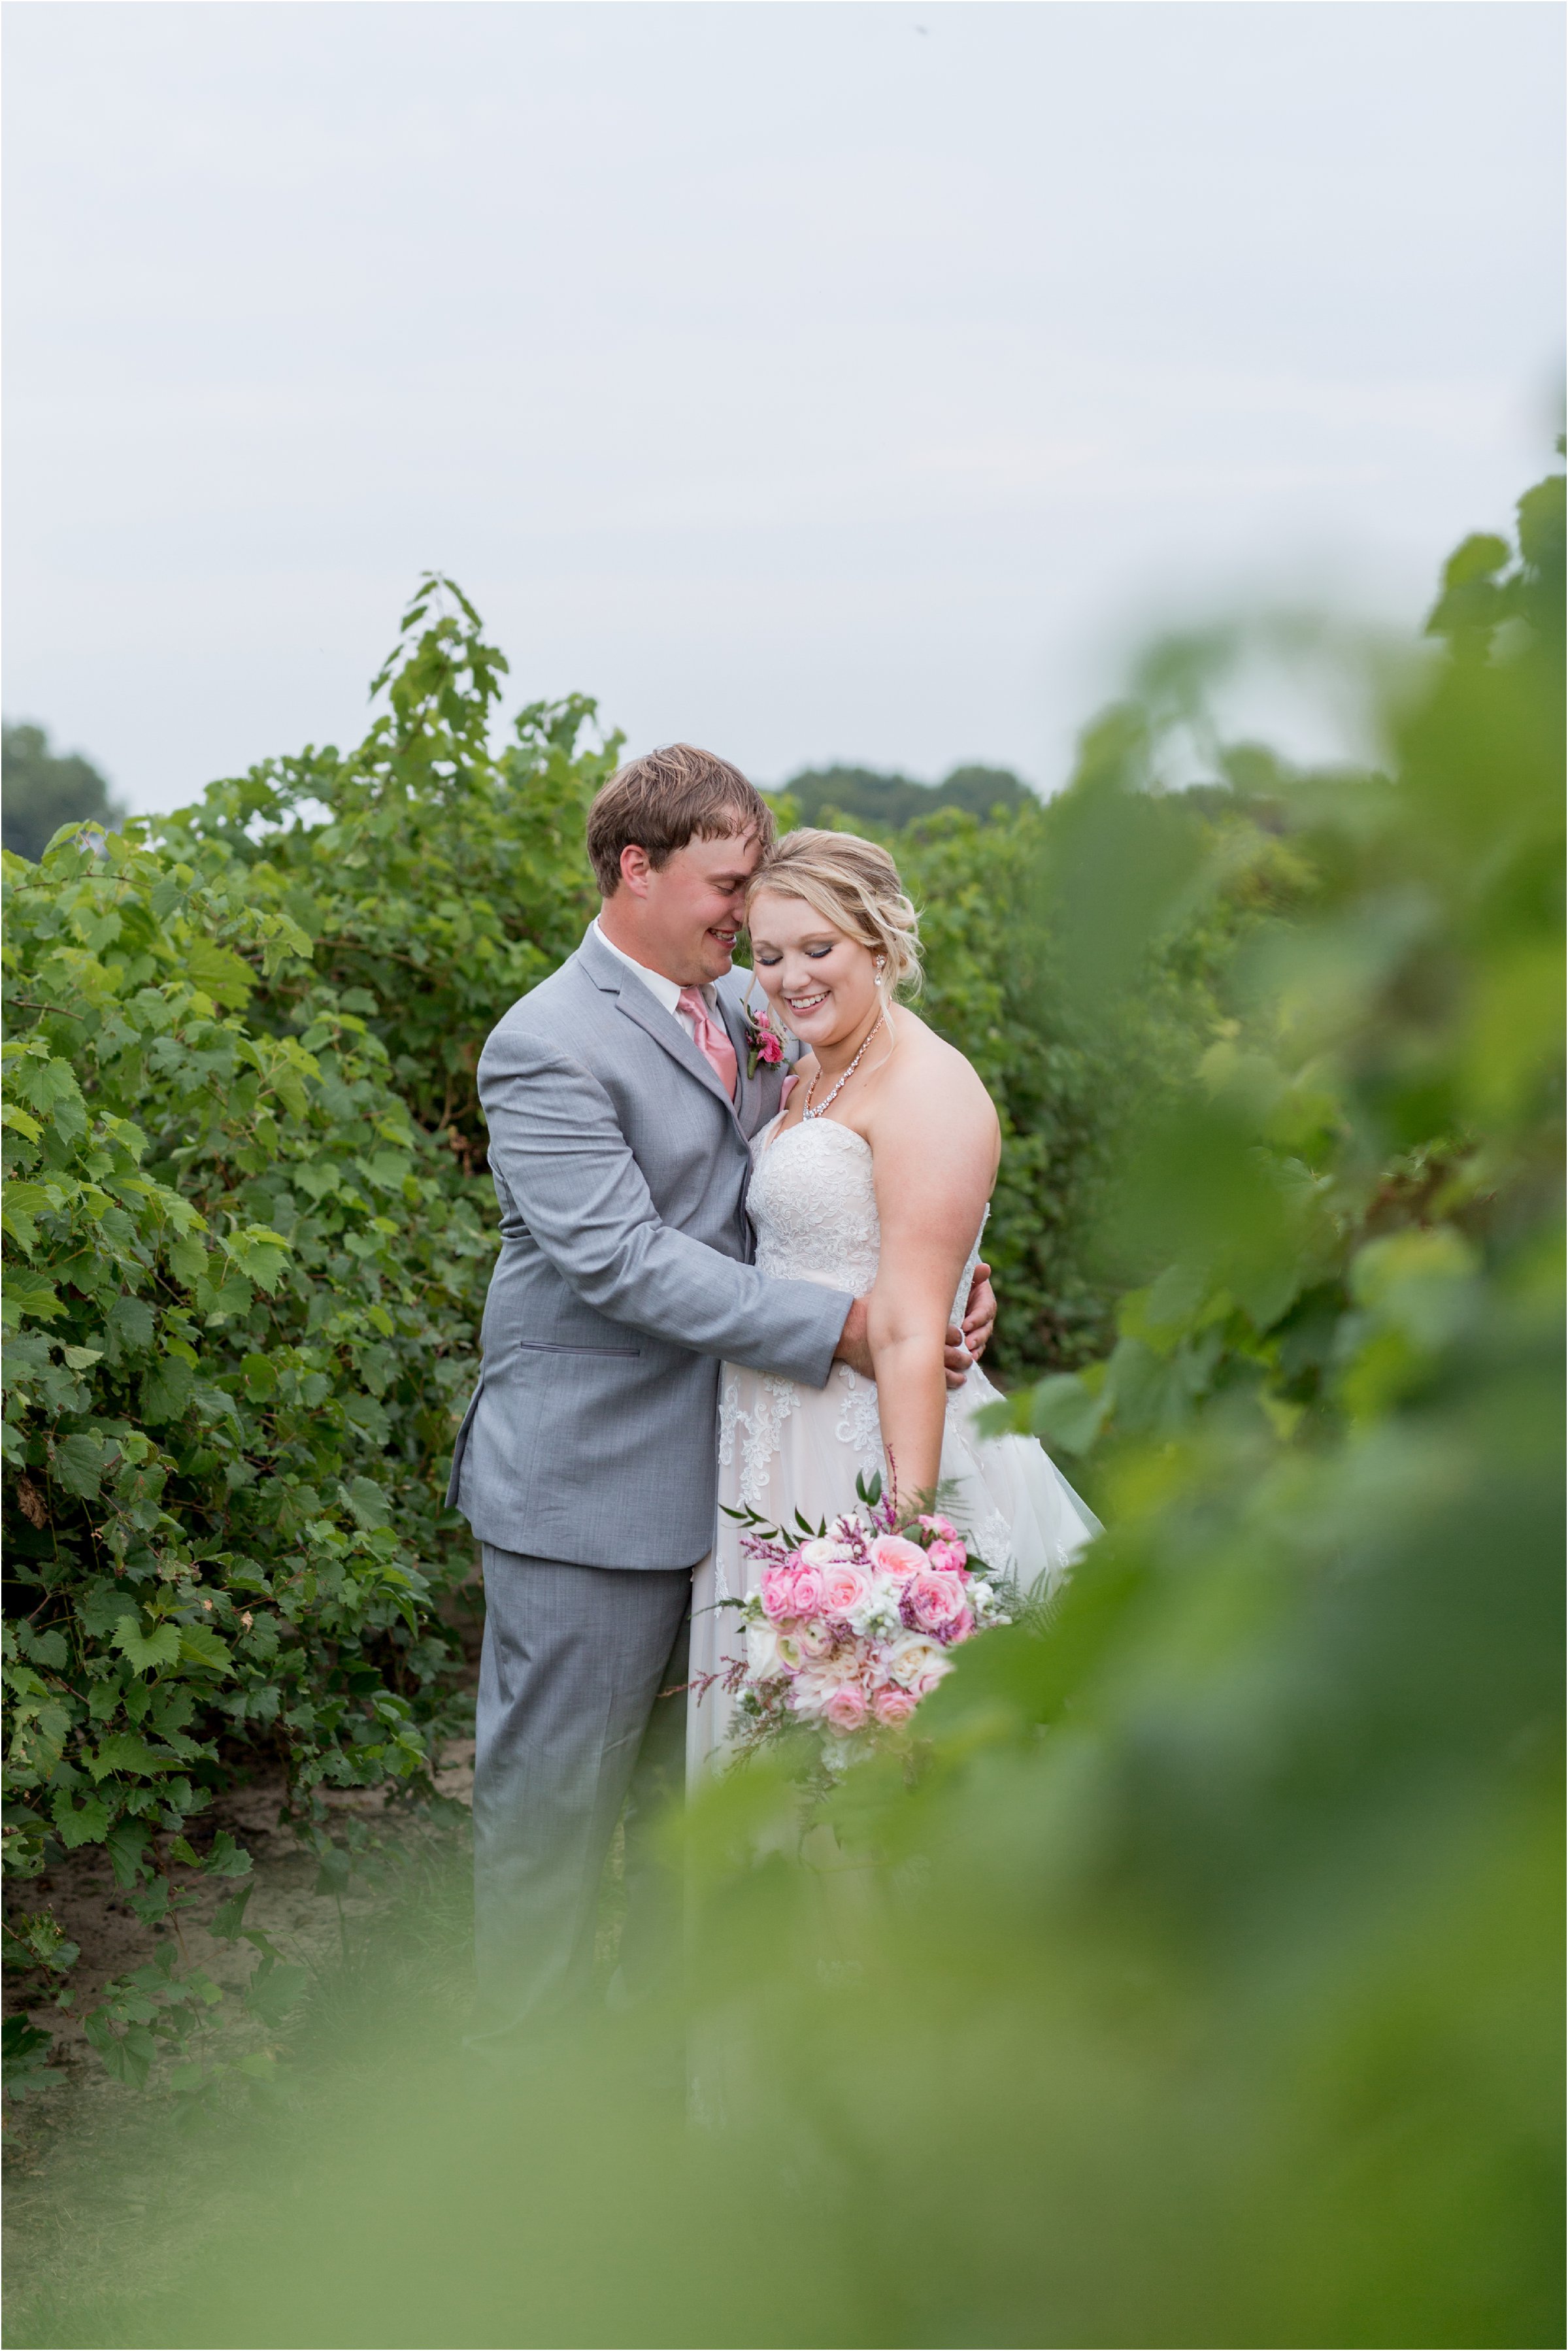 the bride and groom snuggle together in between grape vines with the bride's large bouquet